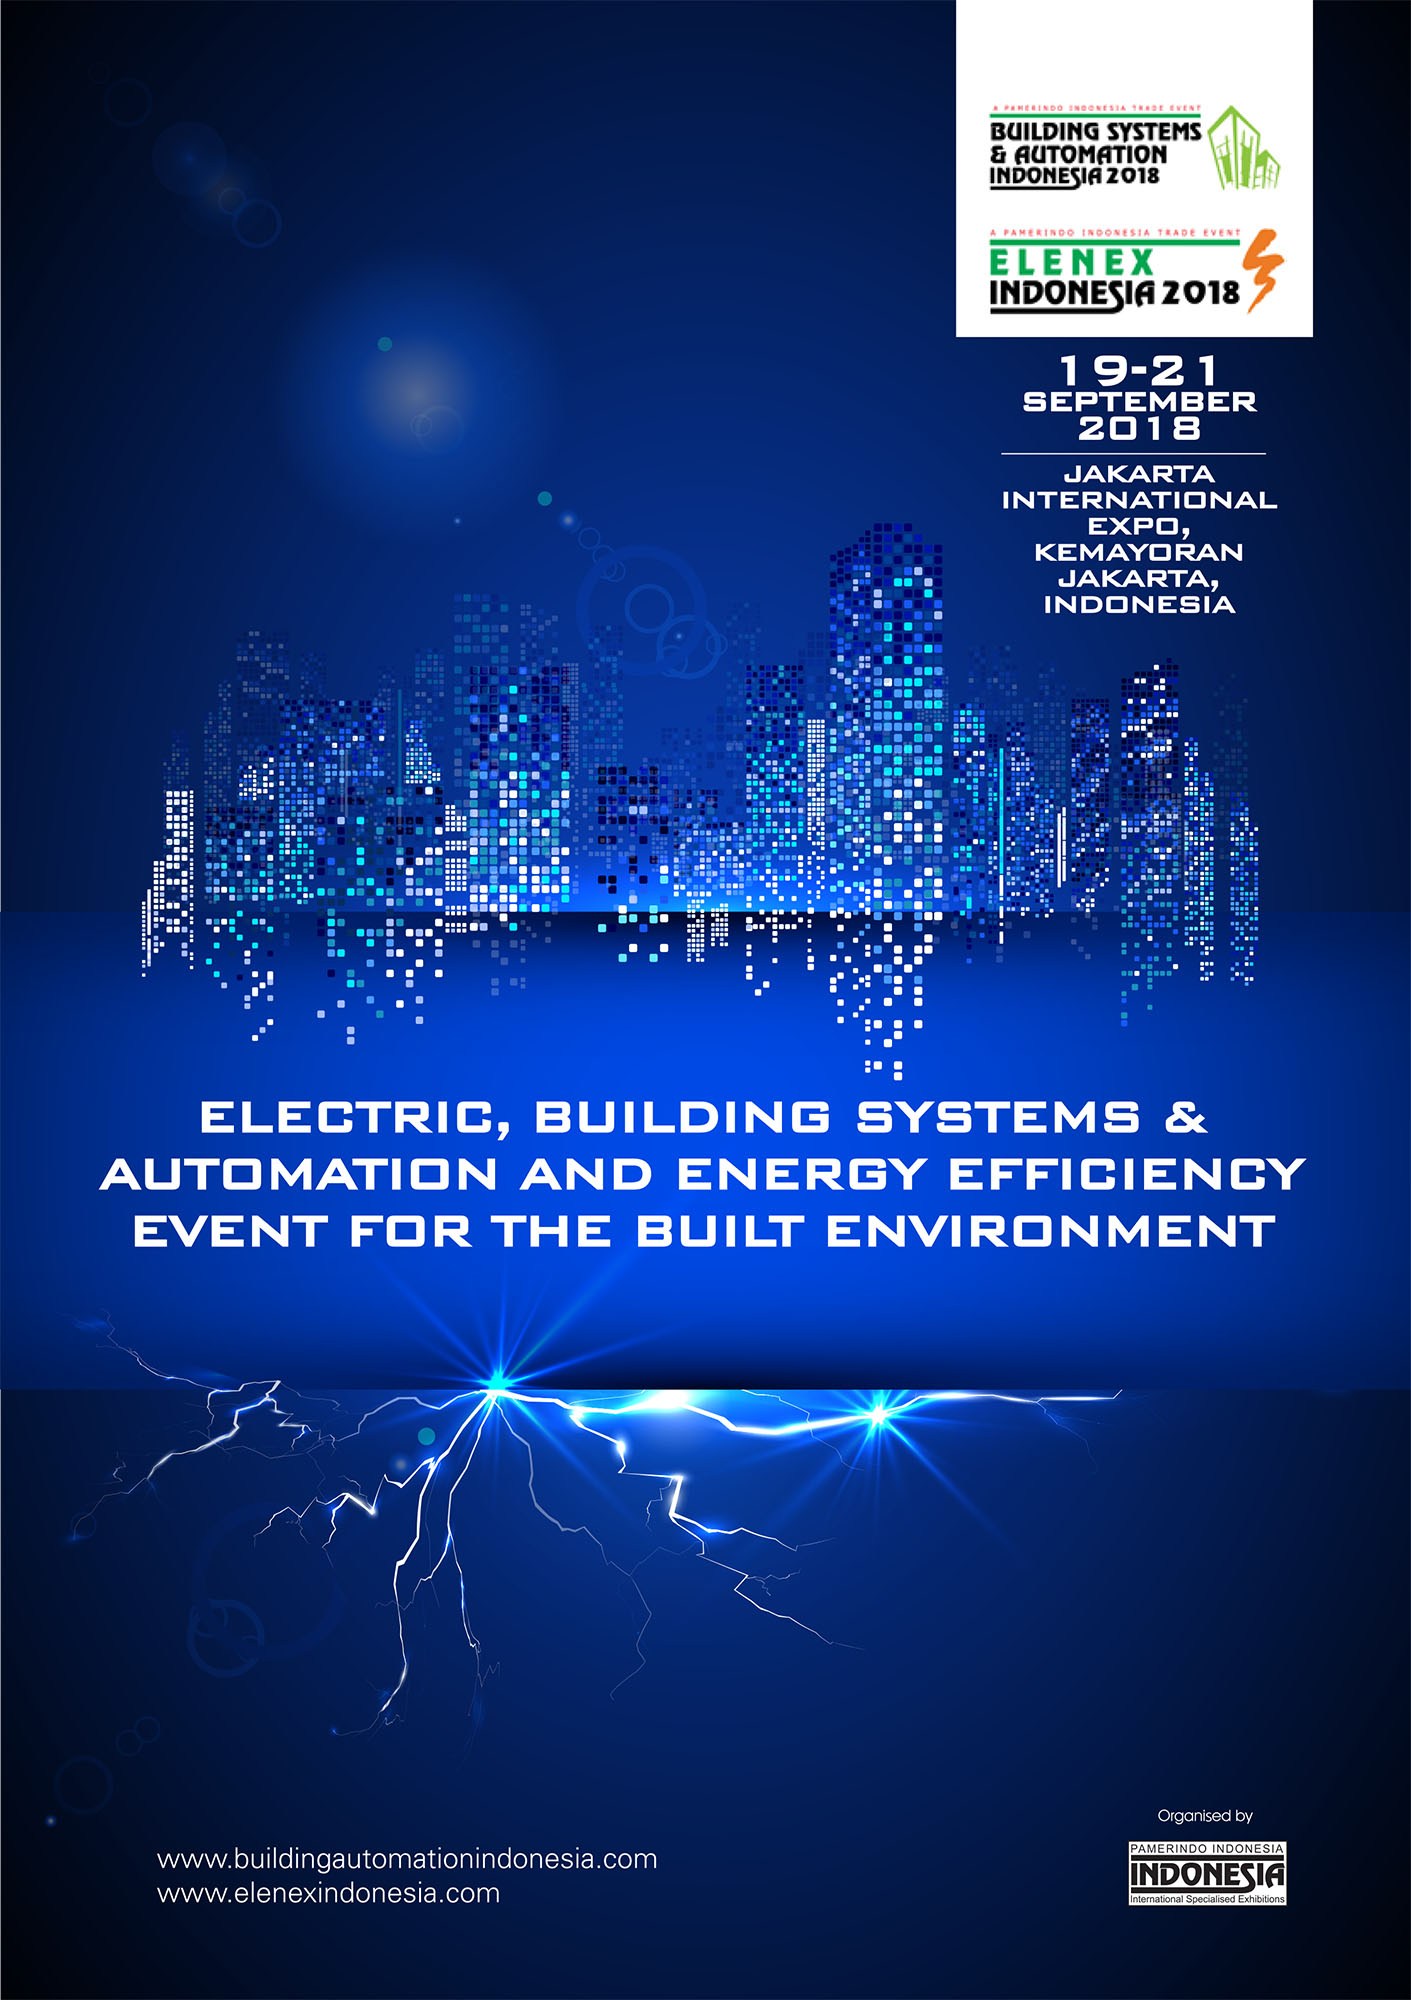 BUILDING SYSTEMS & AUTOMATION INDONESIA 2018